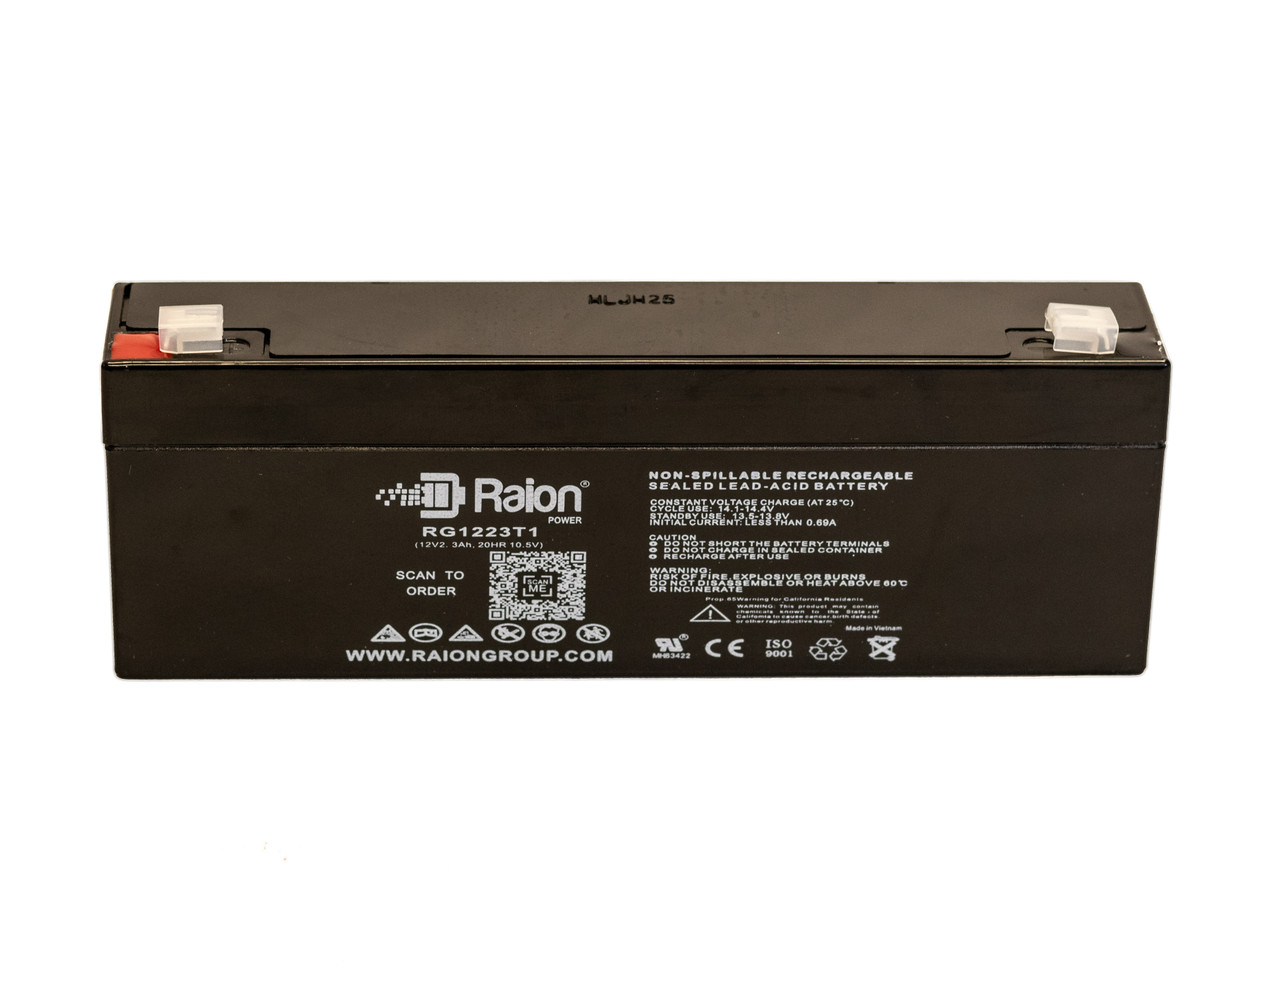 Raion Power 12V 2.3Ah SLA Battery With T1 Terminals For Zimmer ATS 2000 Tourniquet